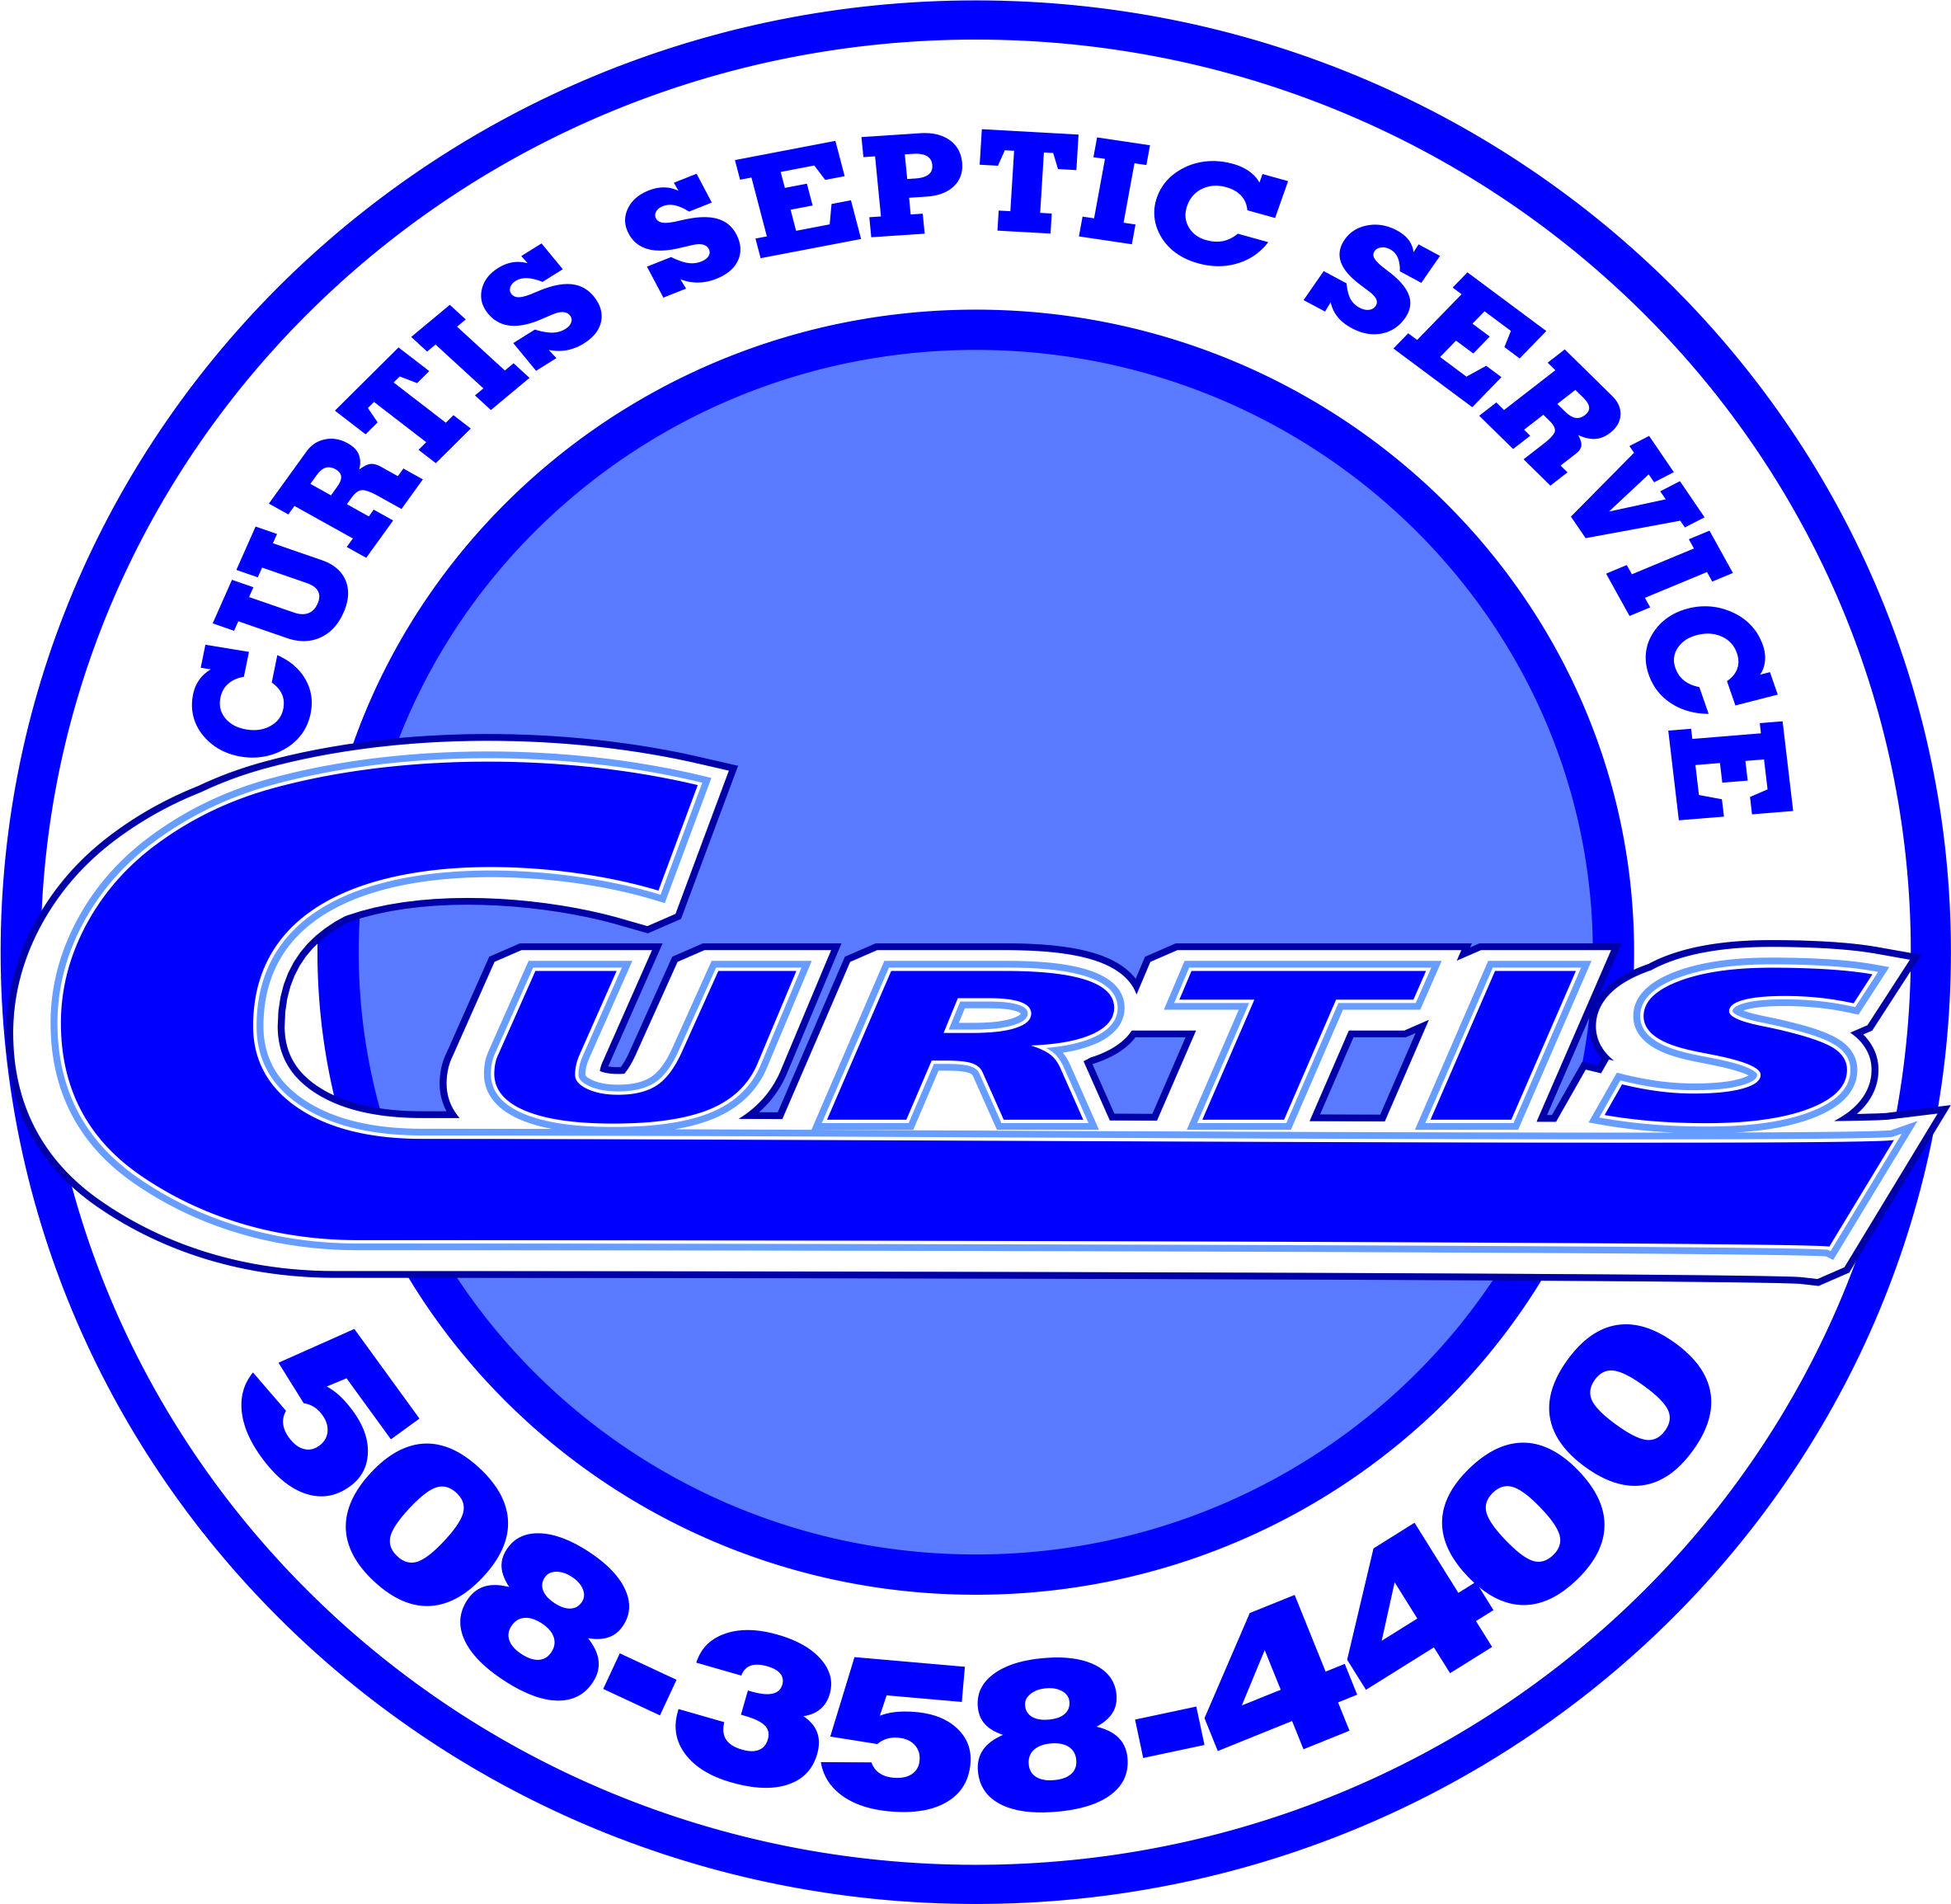 Septic system inspectors in Wrentham, MA.